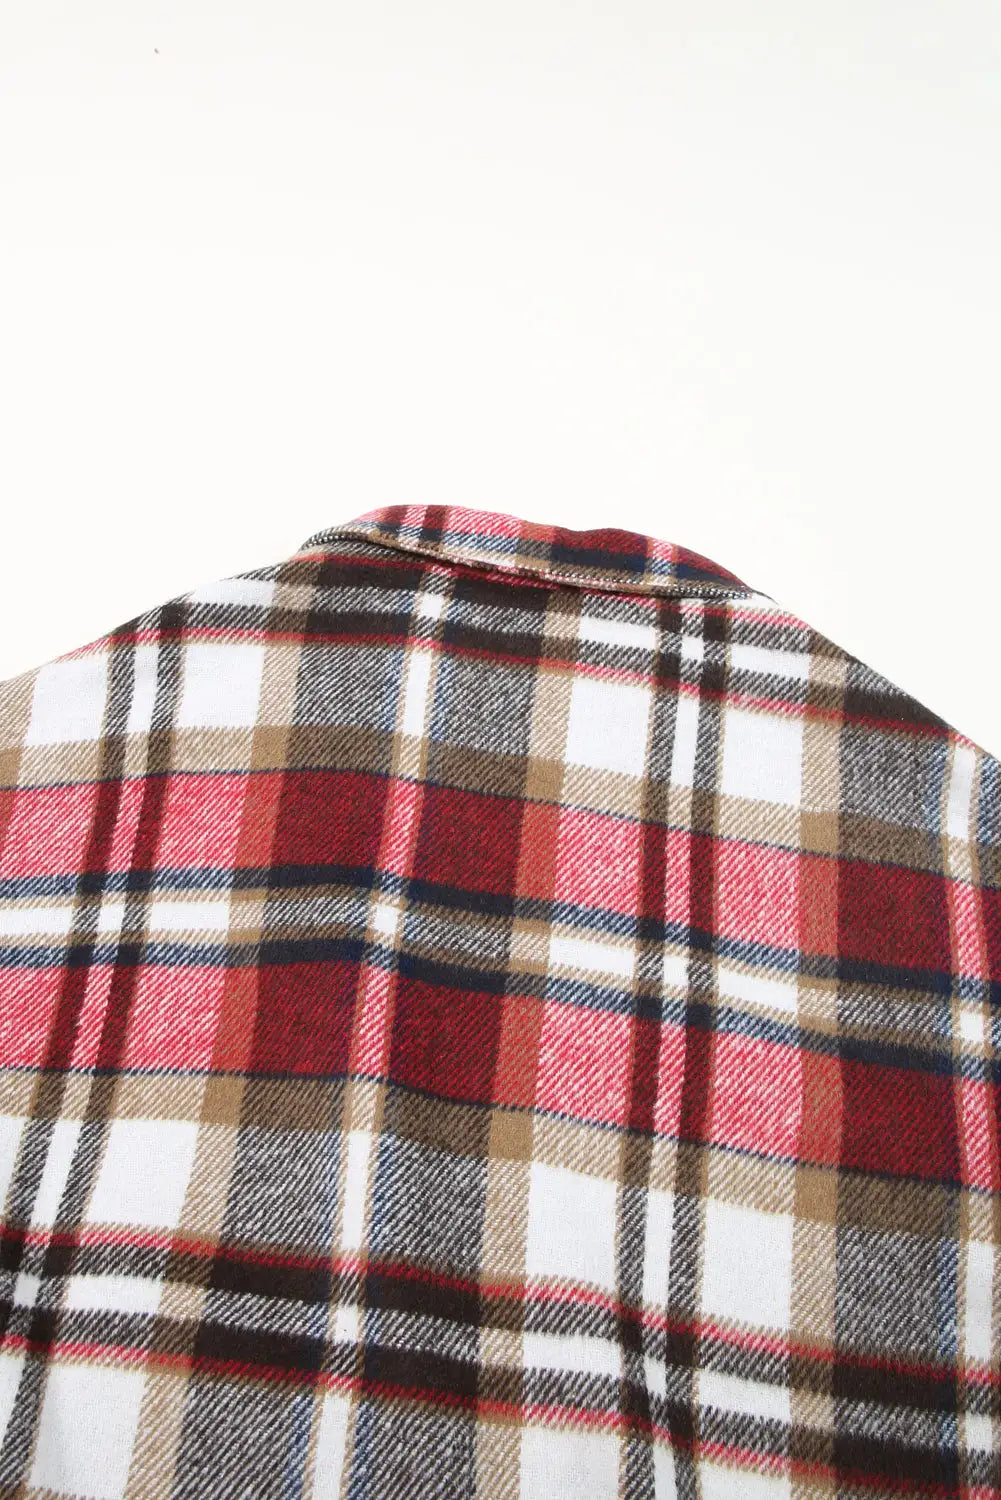 Fiery red plaid button up lapel jacket - outerwear